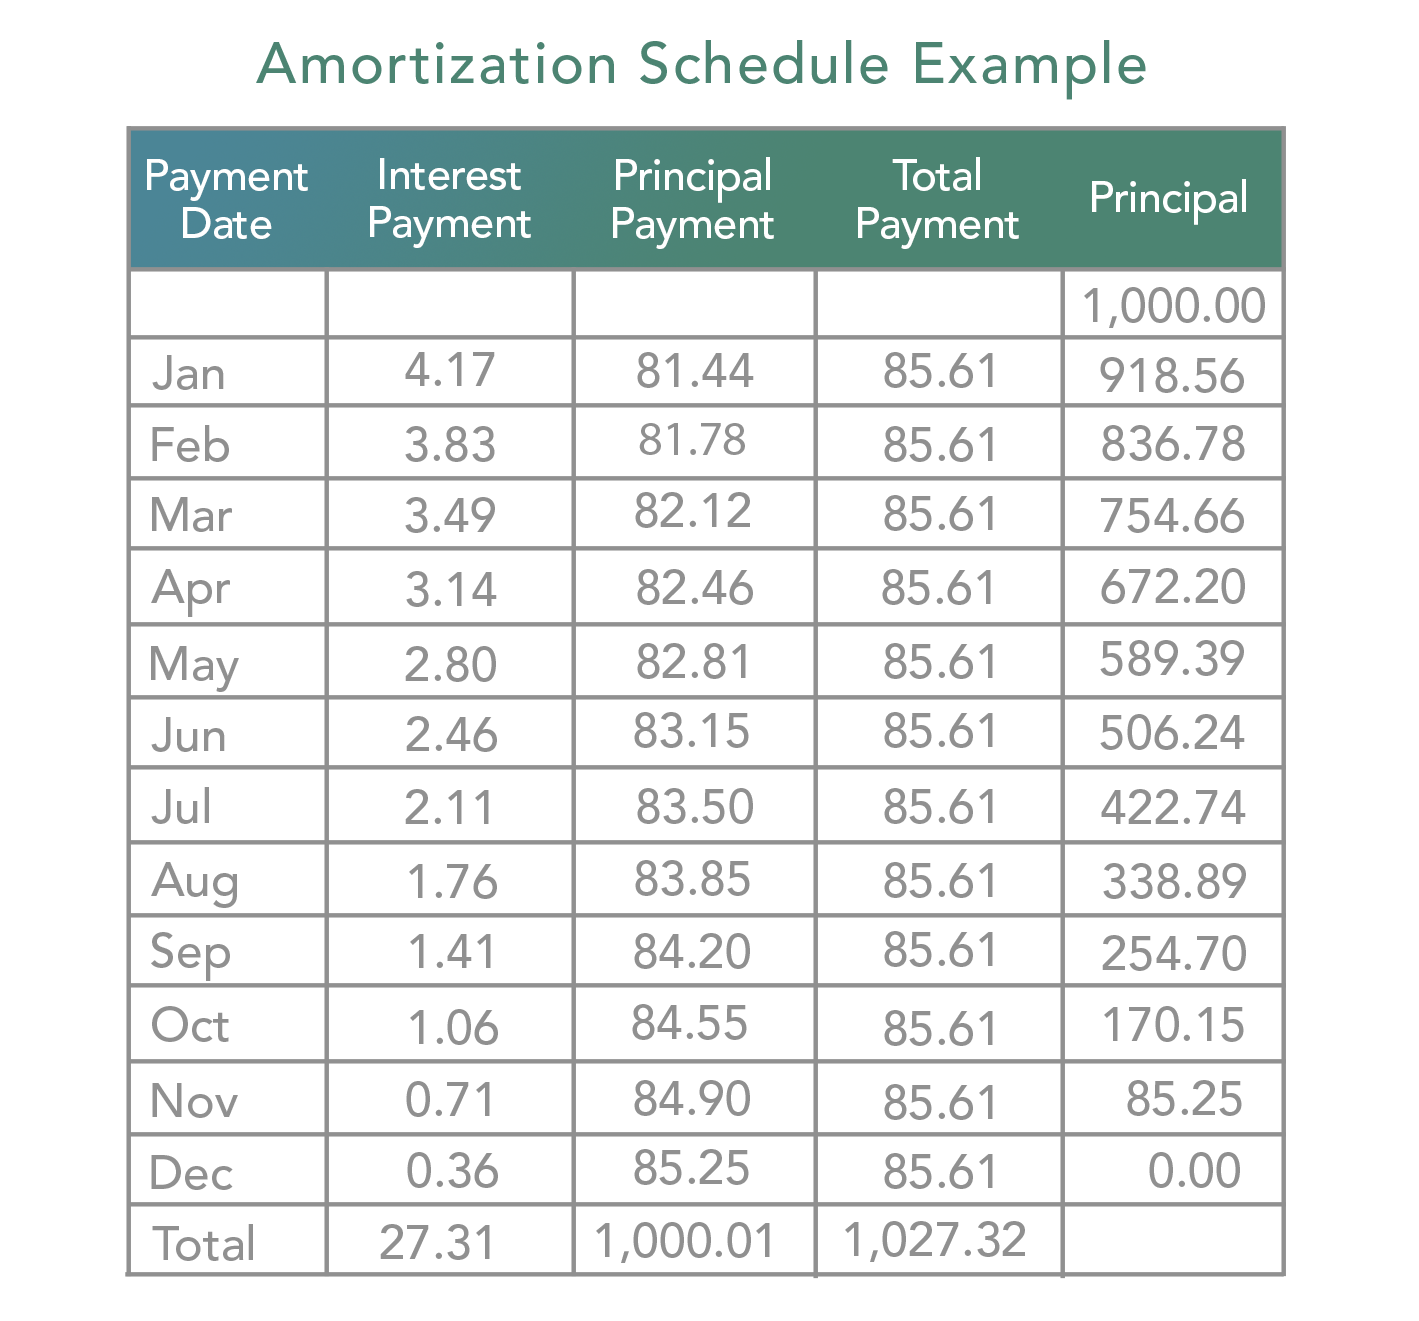 Amortization Schedule Definition & Example | Investinganswers